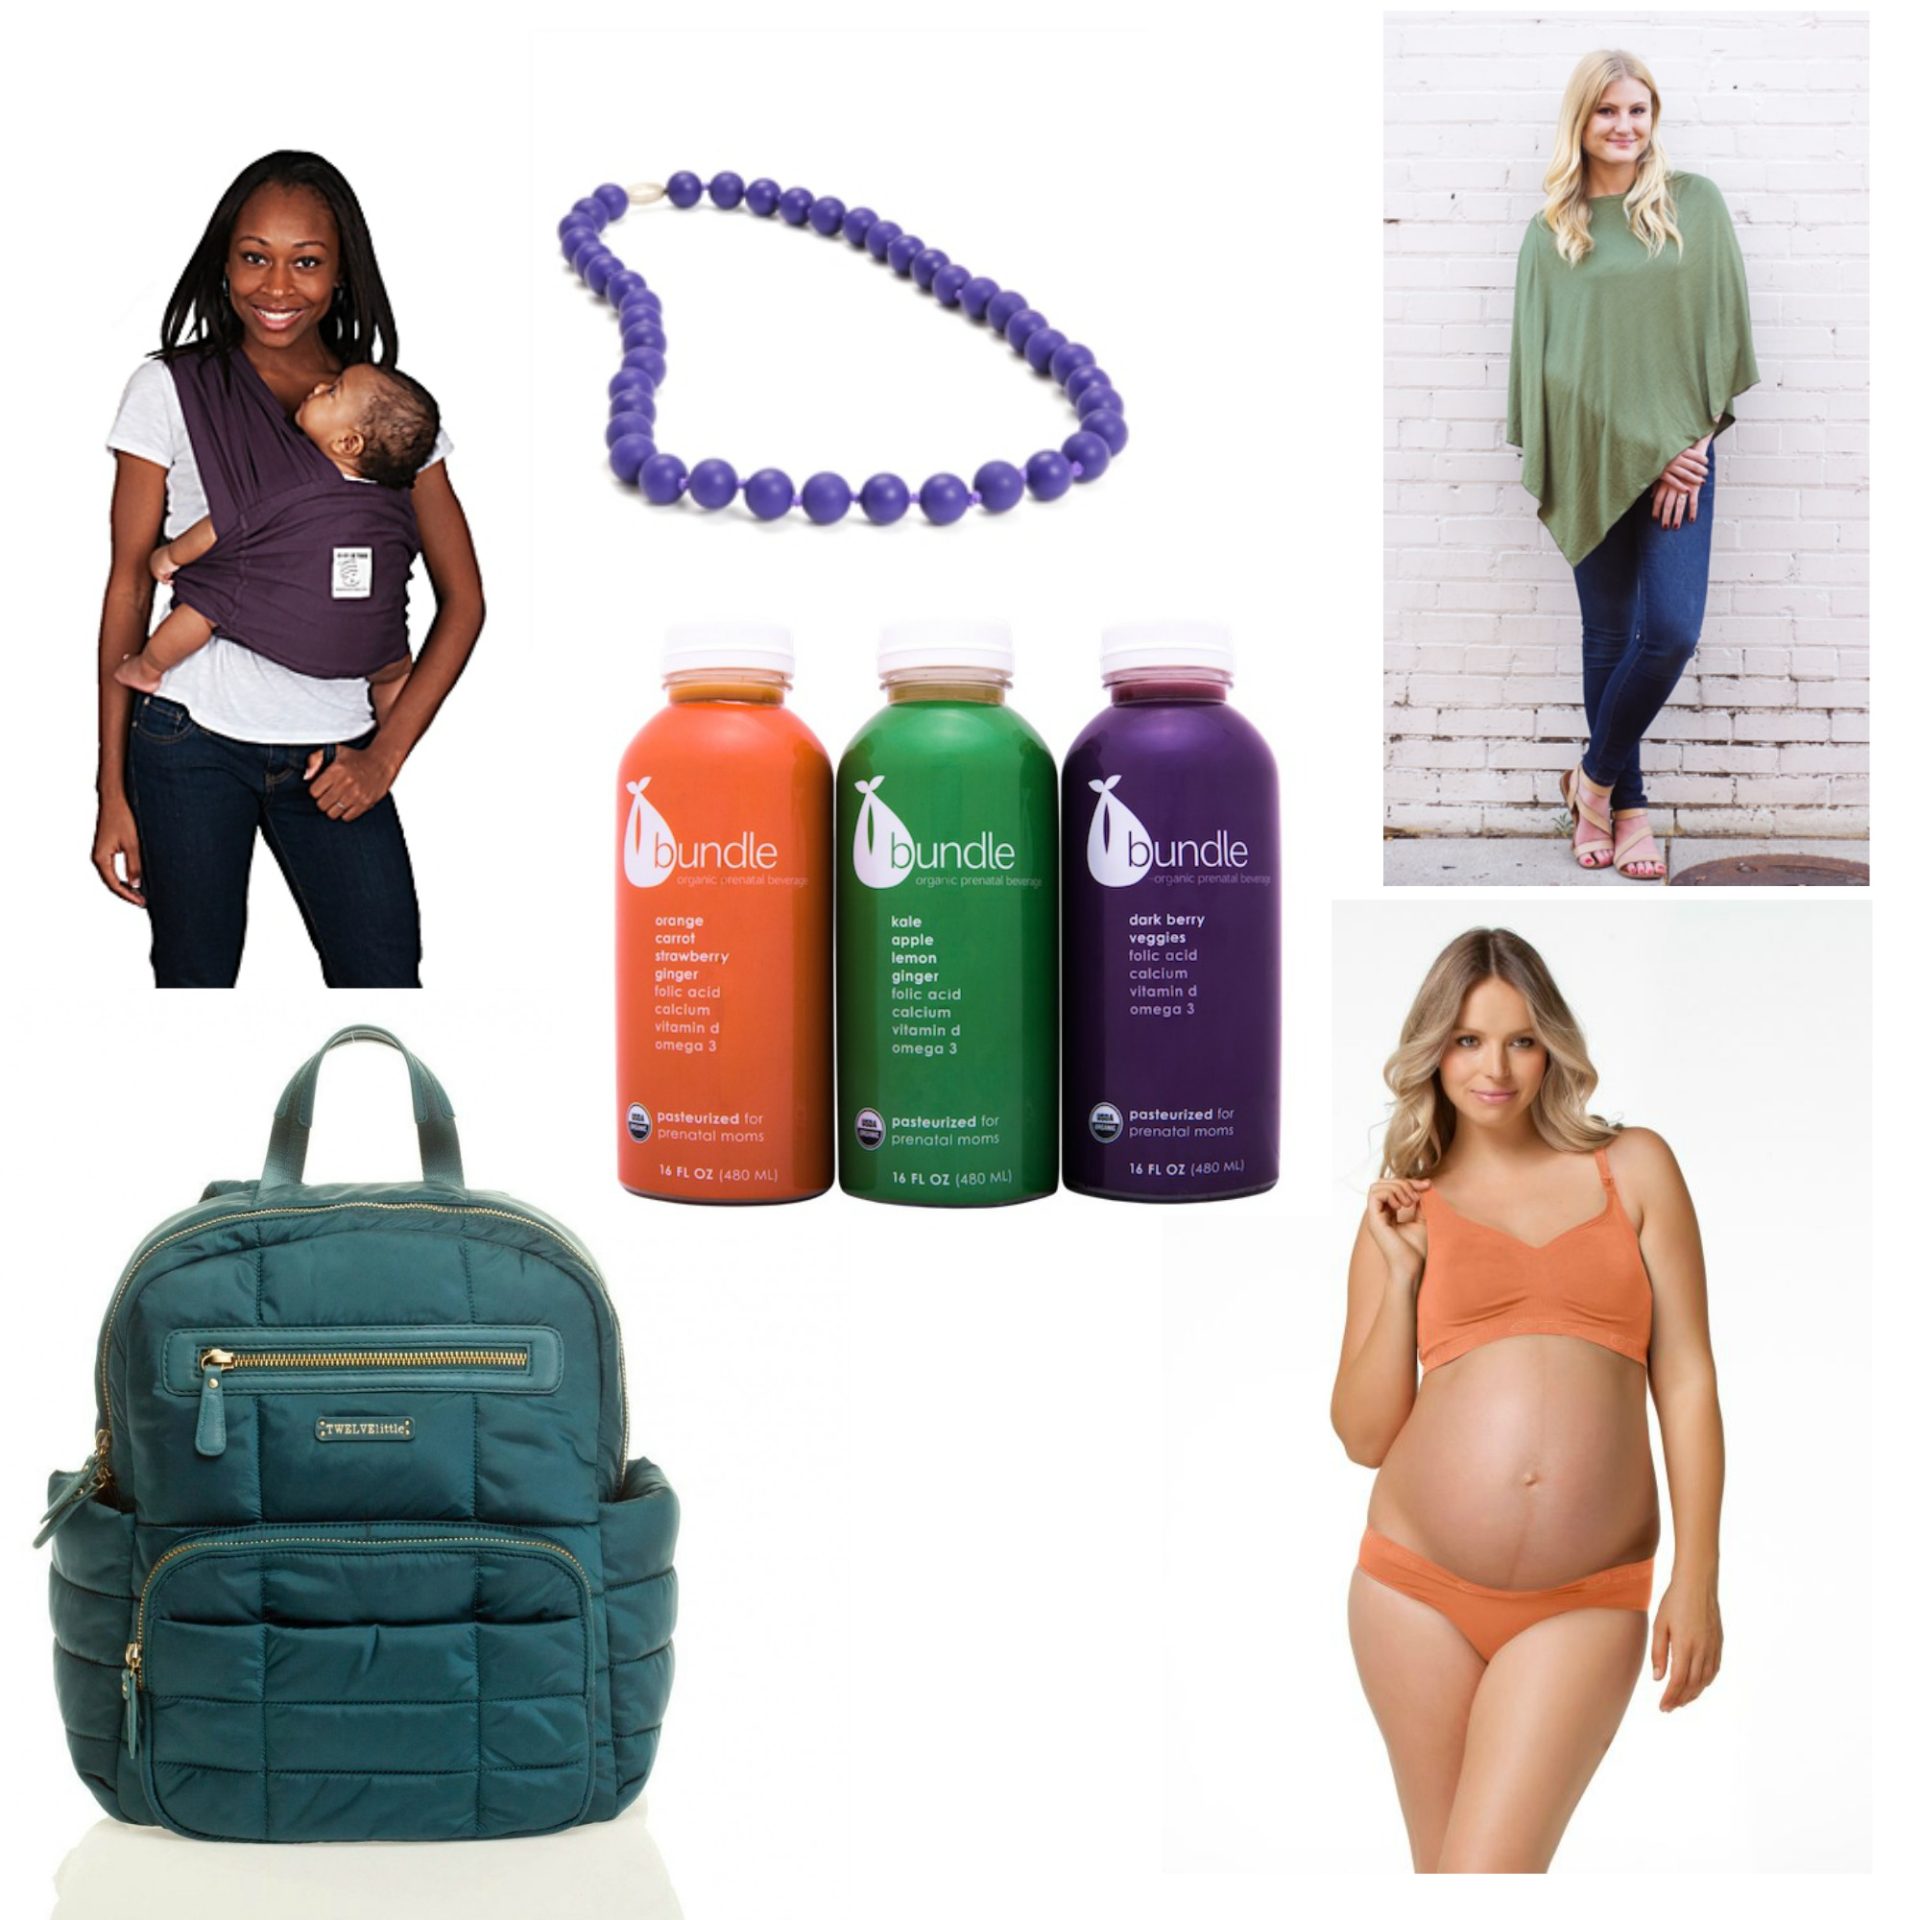 New Mom Trends In The Colors Of Bundle Organics